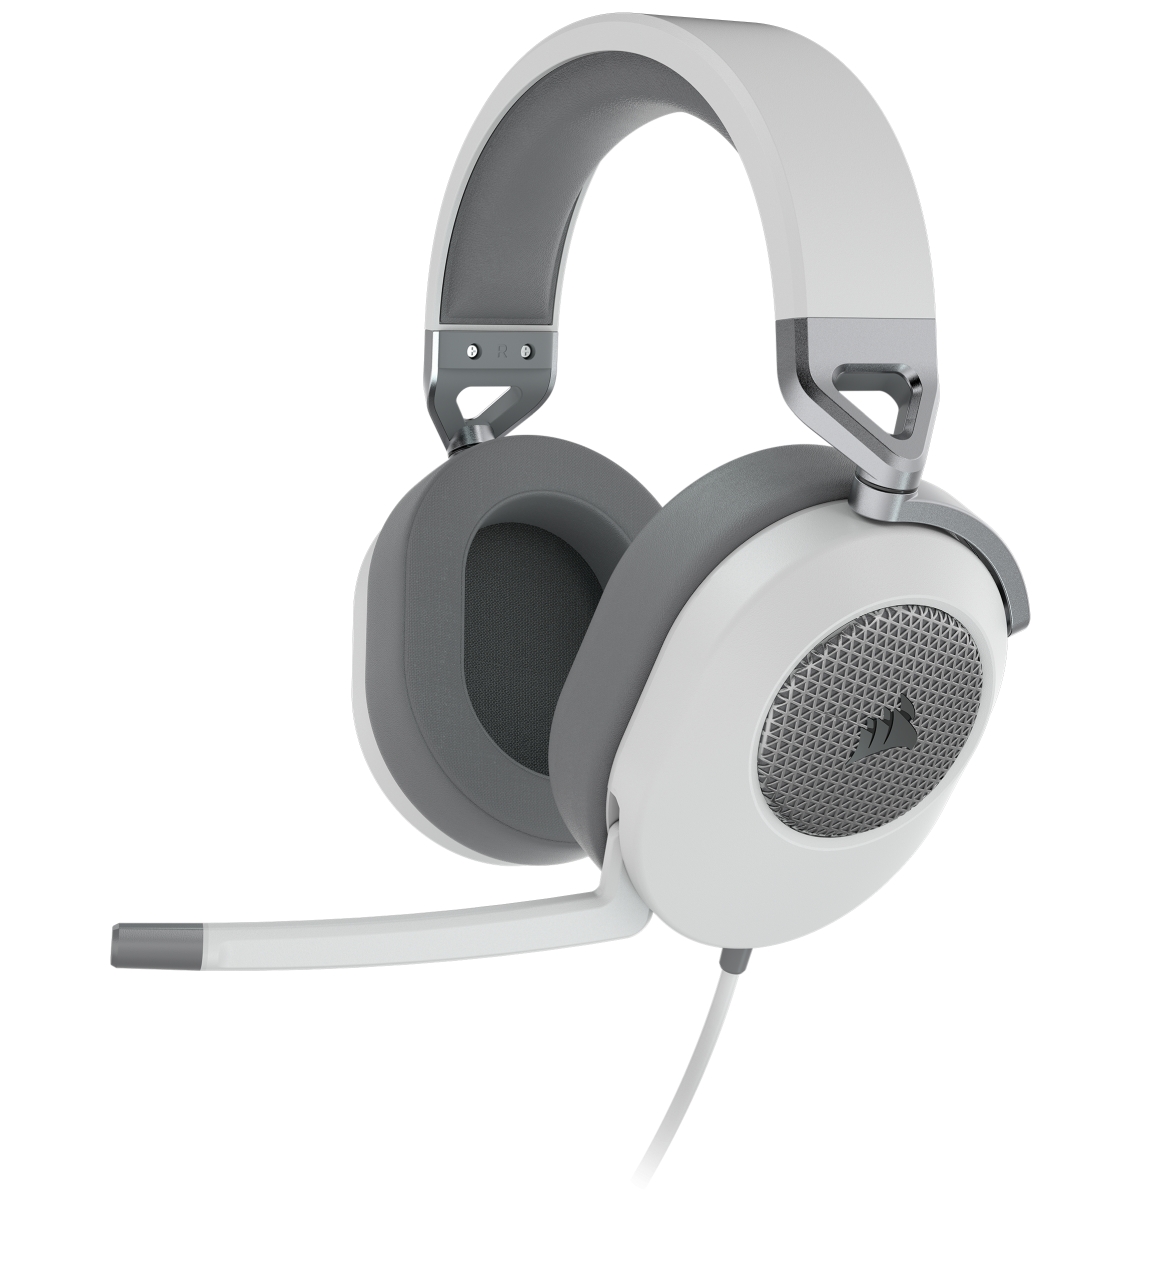 HS65 SURROUND wired gaming headset with visualization of 7.1 surround audio.